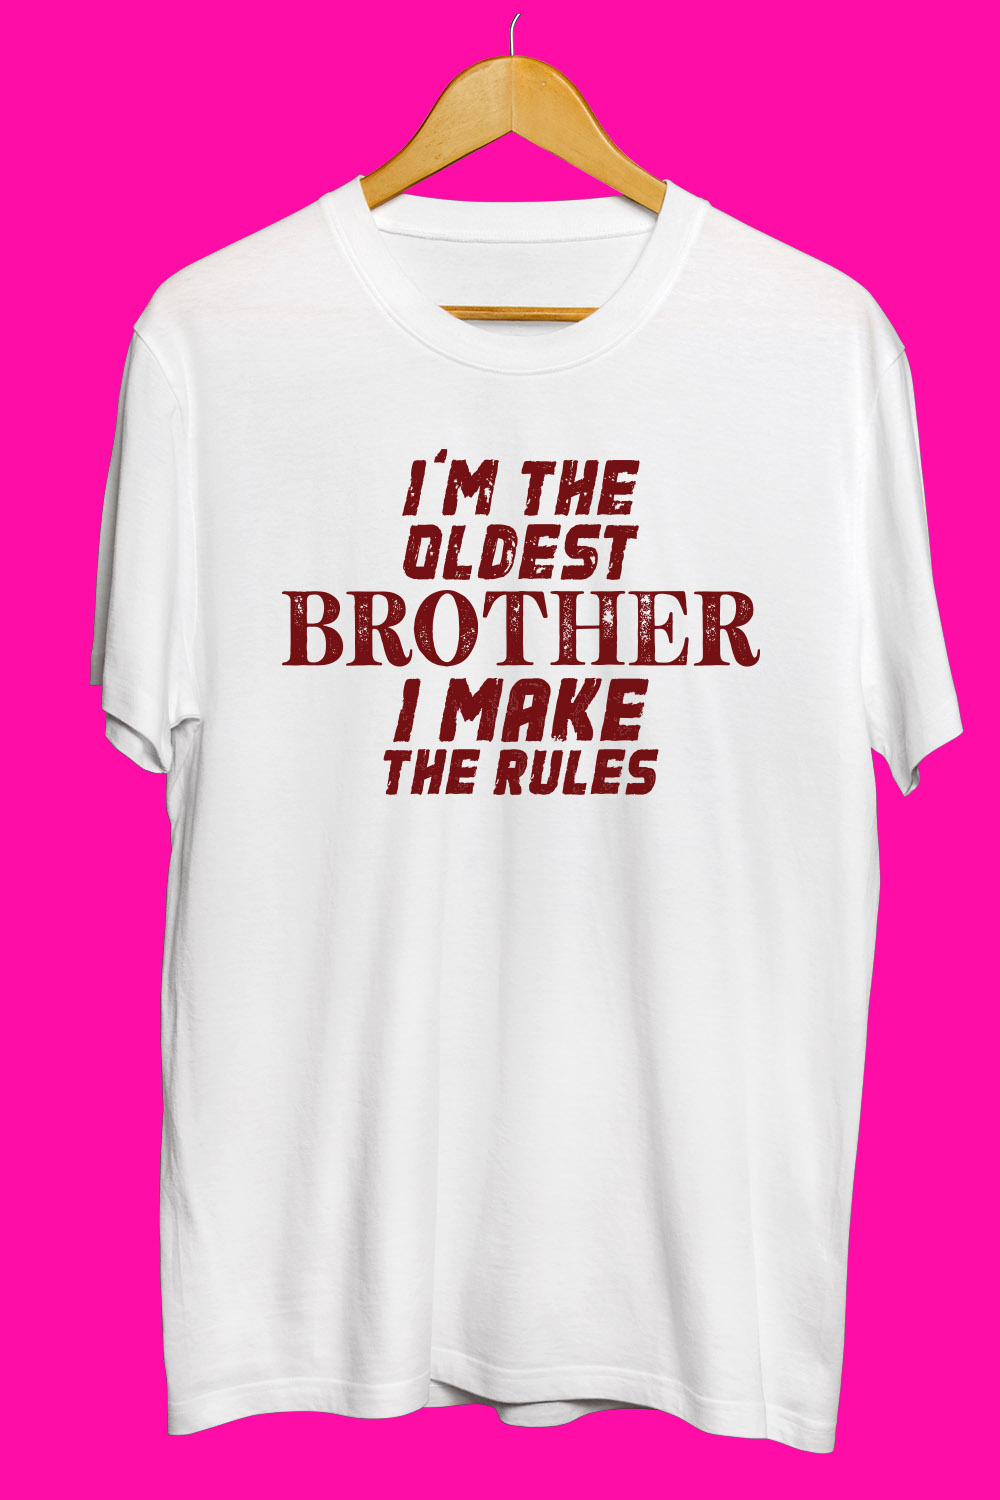 Brother Day T Shirt Bundle pinterest preview image.